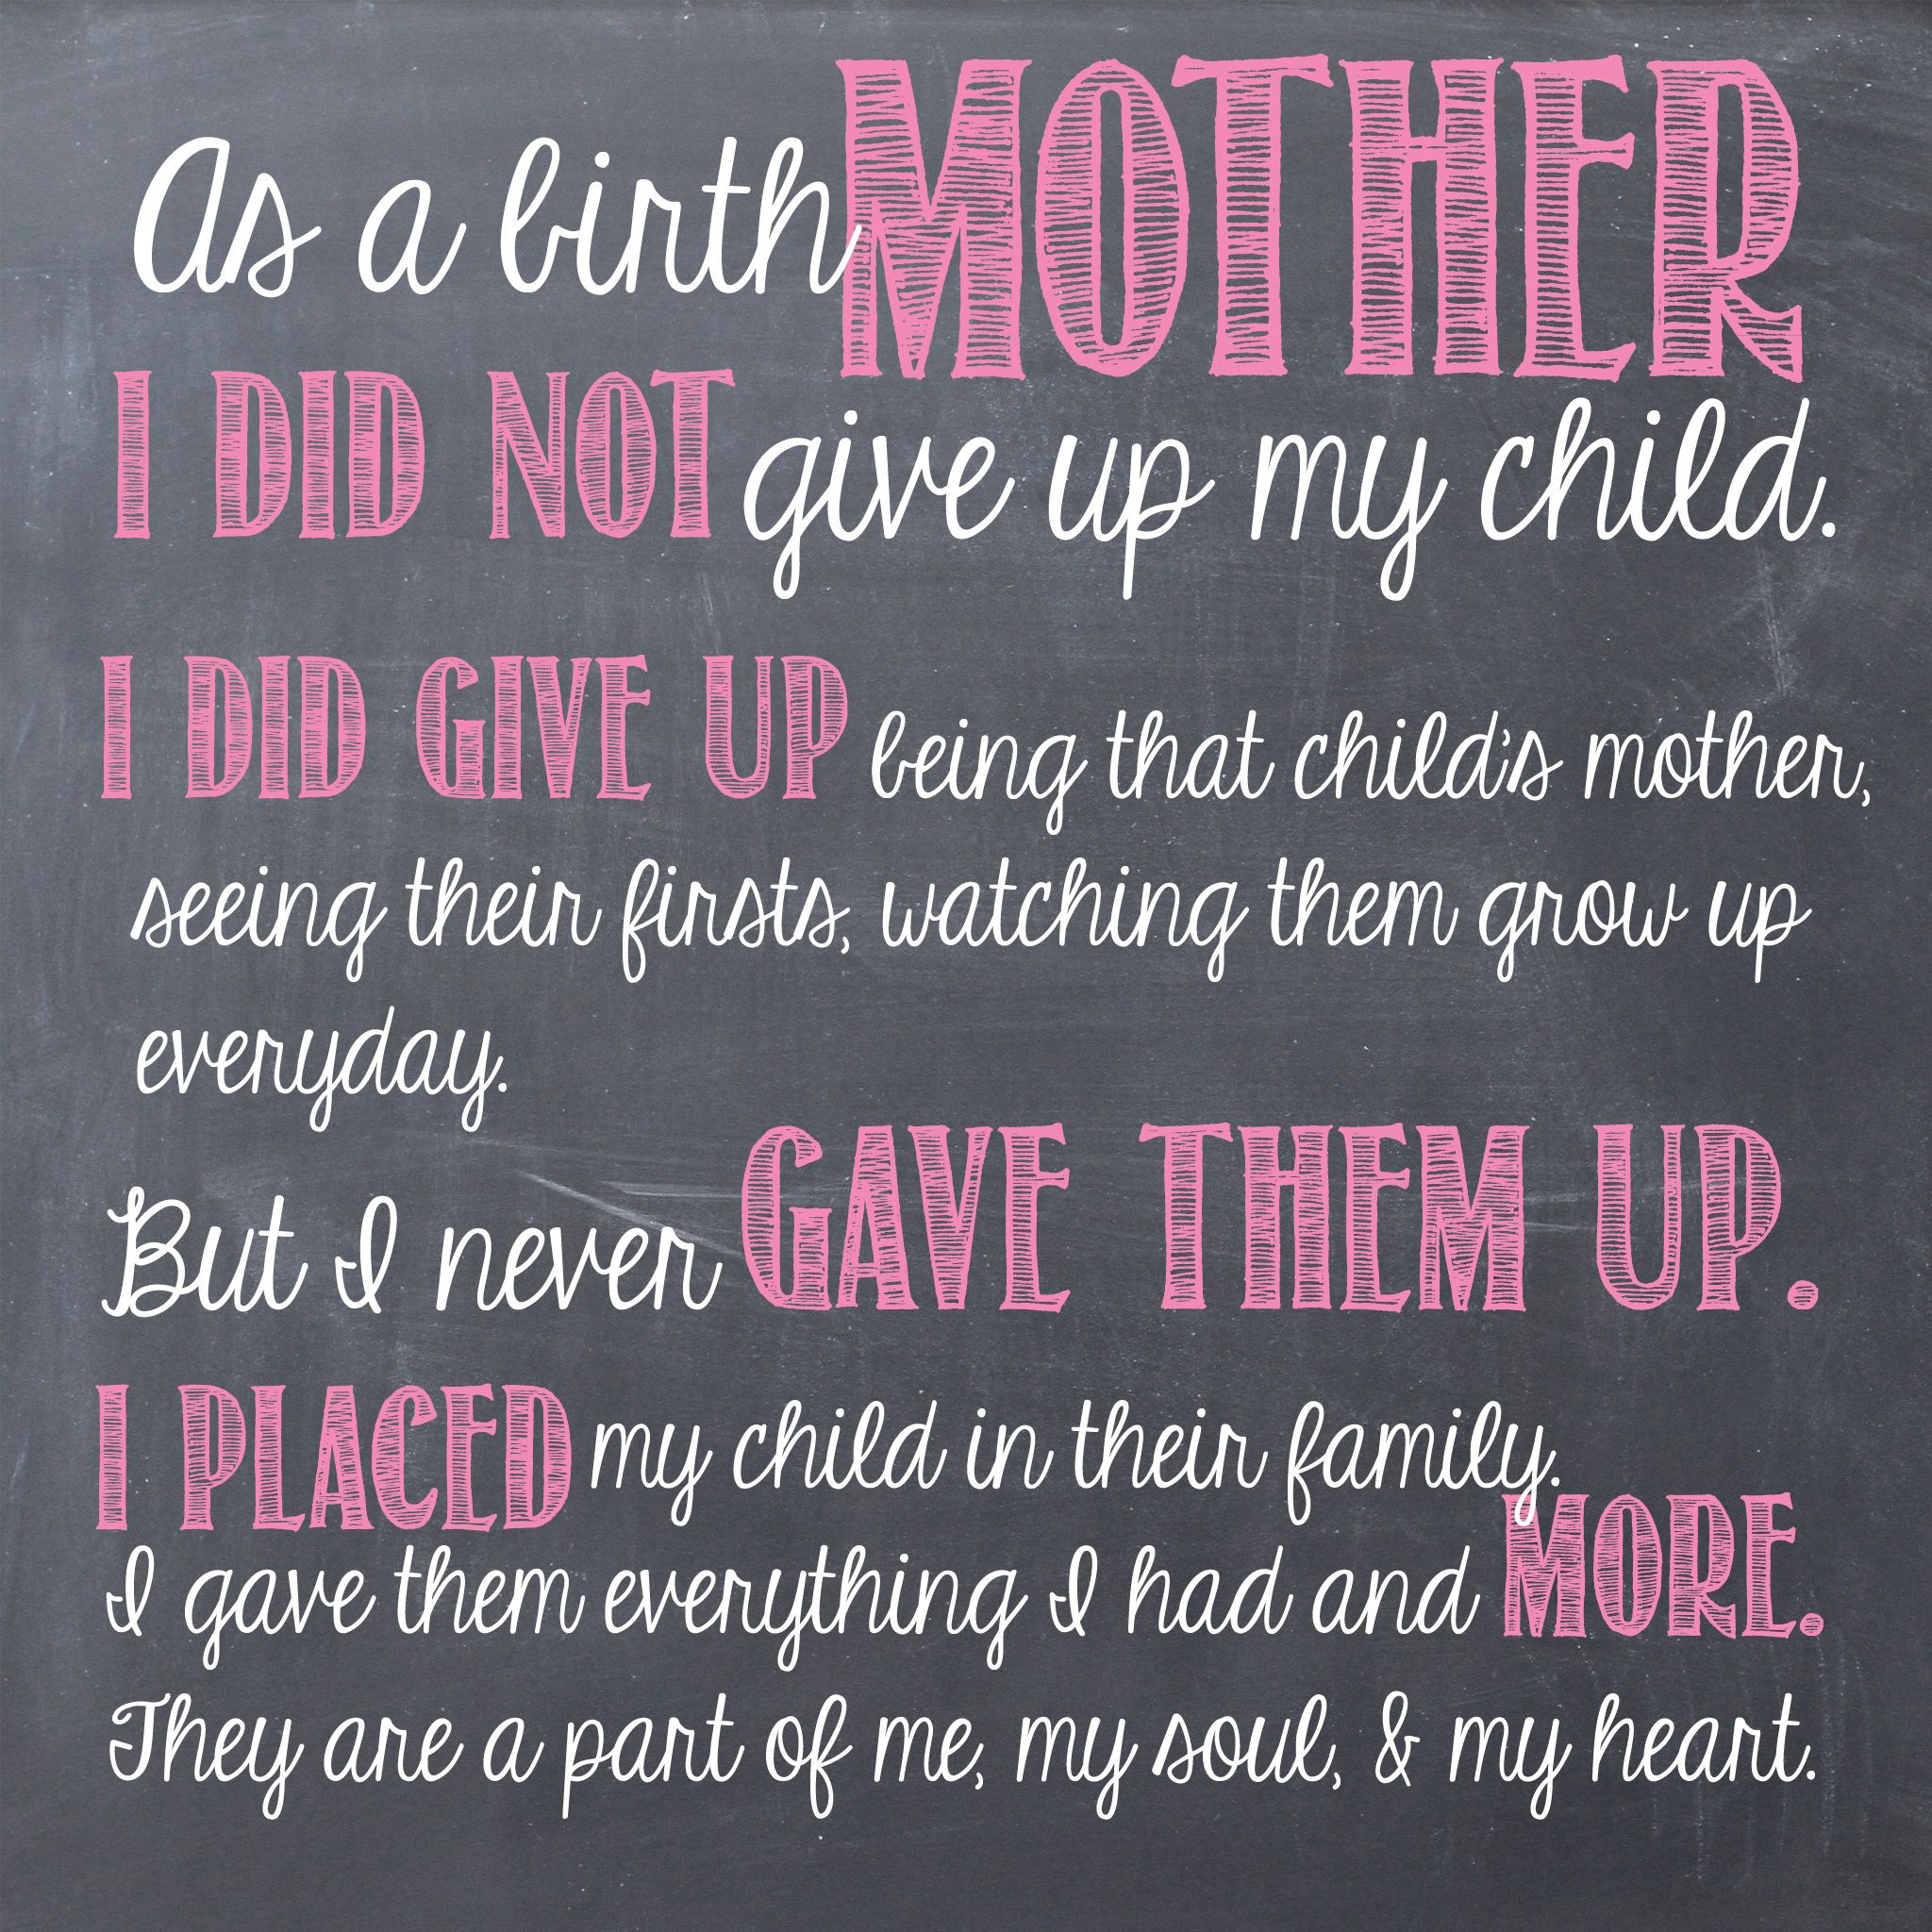 Adoption Quotes For Birth Mothers
 Birth Mother Quote by Terra Cooper openadoption